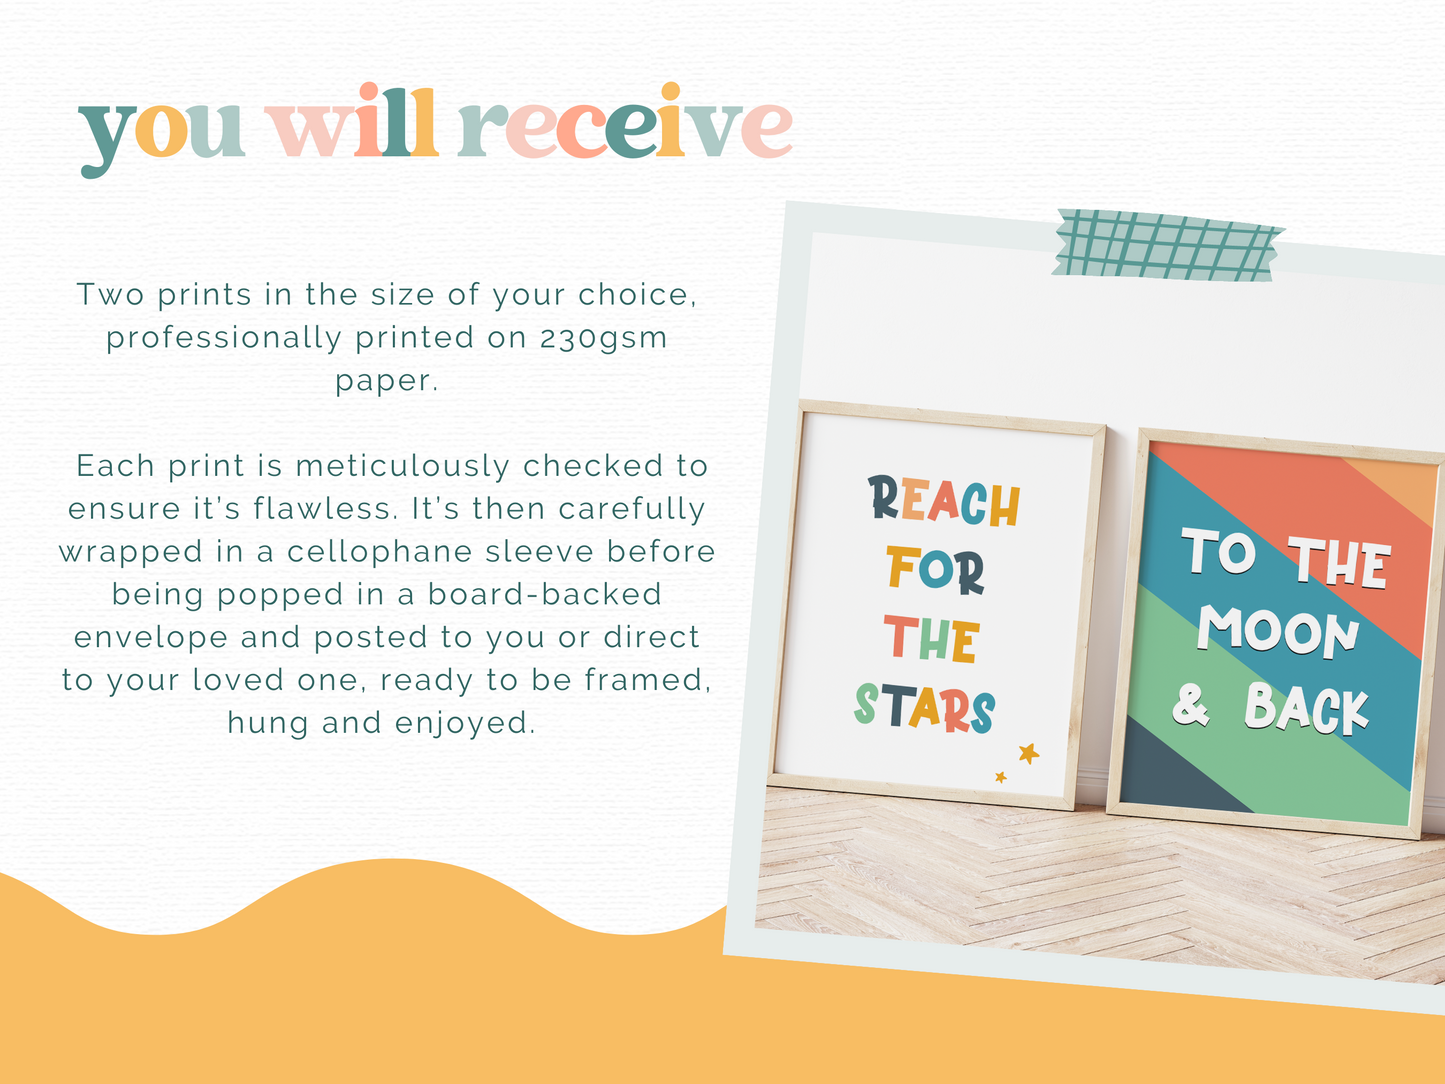 PRINT SET | Reach for the Stars & To the Moon & Back